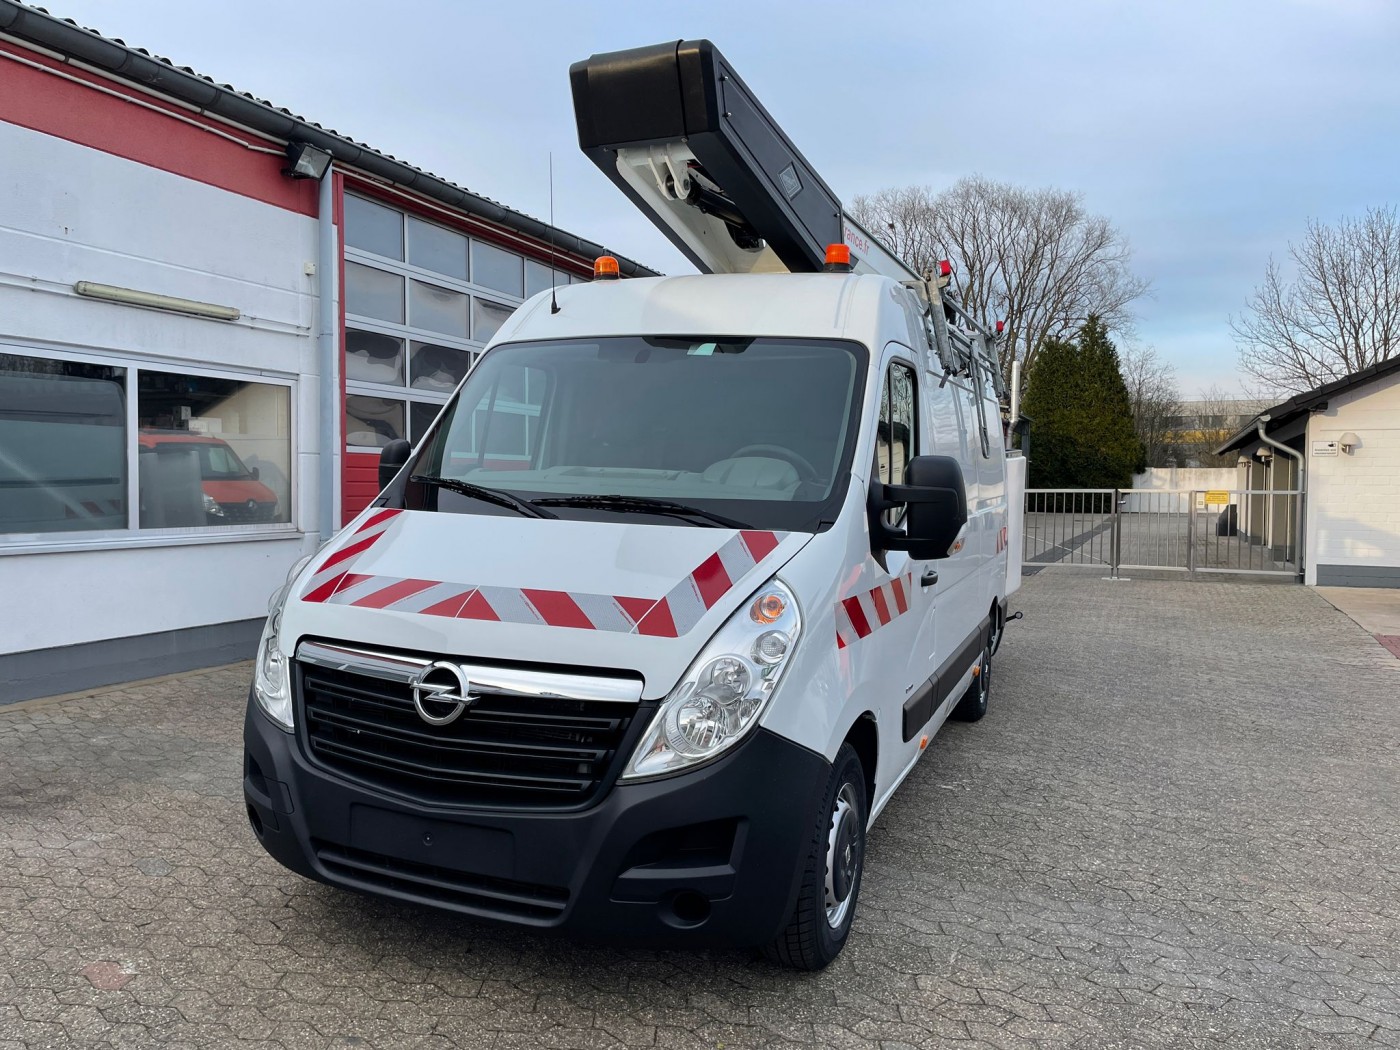 Opel Opel Movano aerial work platform Time France ET38LF 14m